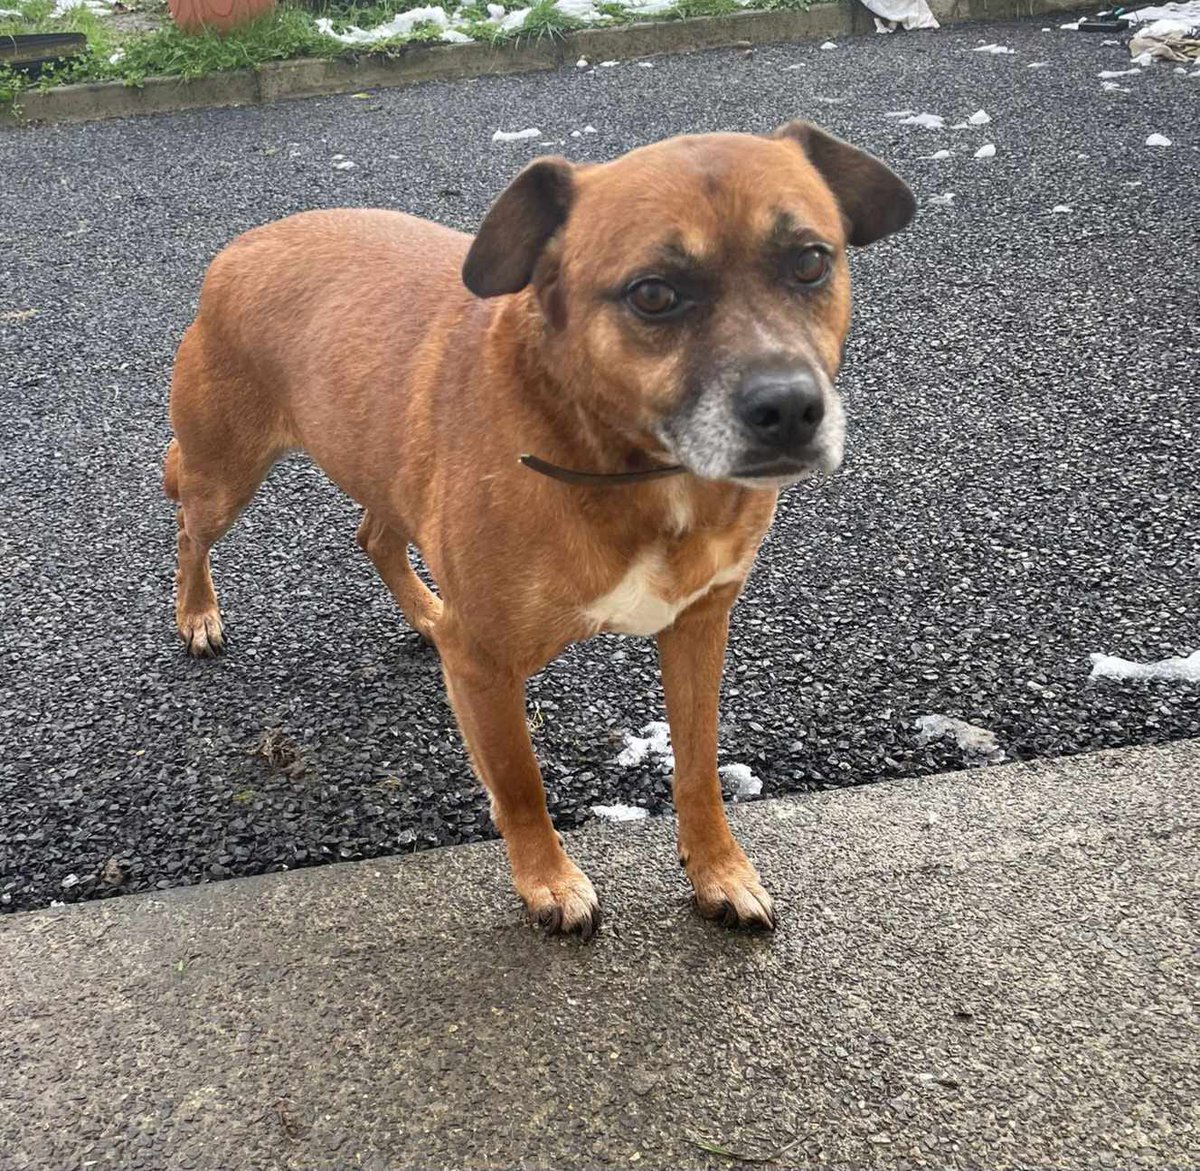 Looking for a family to call his own 💙 Marley is an older dog who is coming into our shelter after being in a home environment. It can be incredibly difficult for dogs used to a loving family to adjust in kennel life so we need a home for him asap. 🐶: ispca.ie/adoptions/marl…